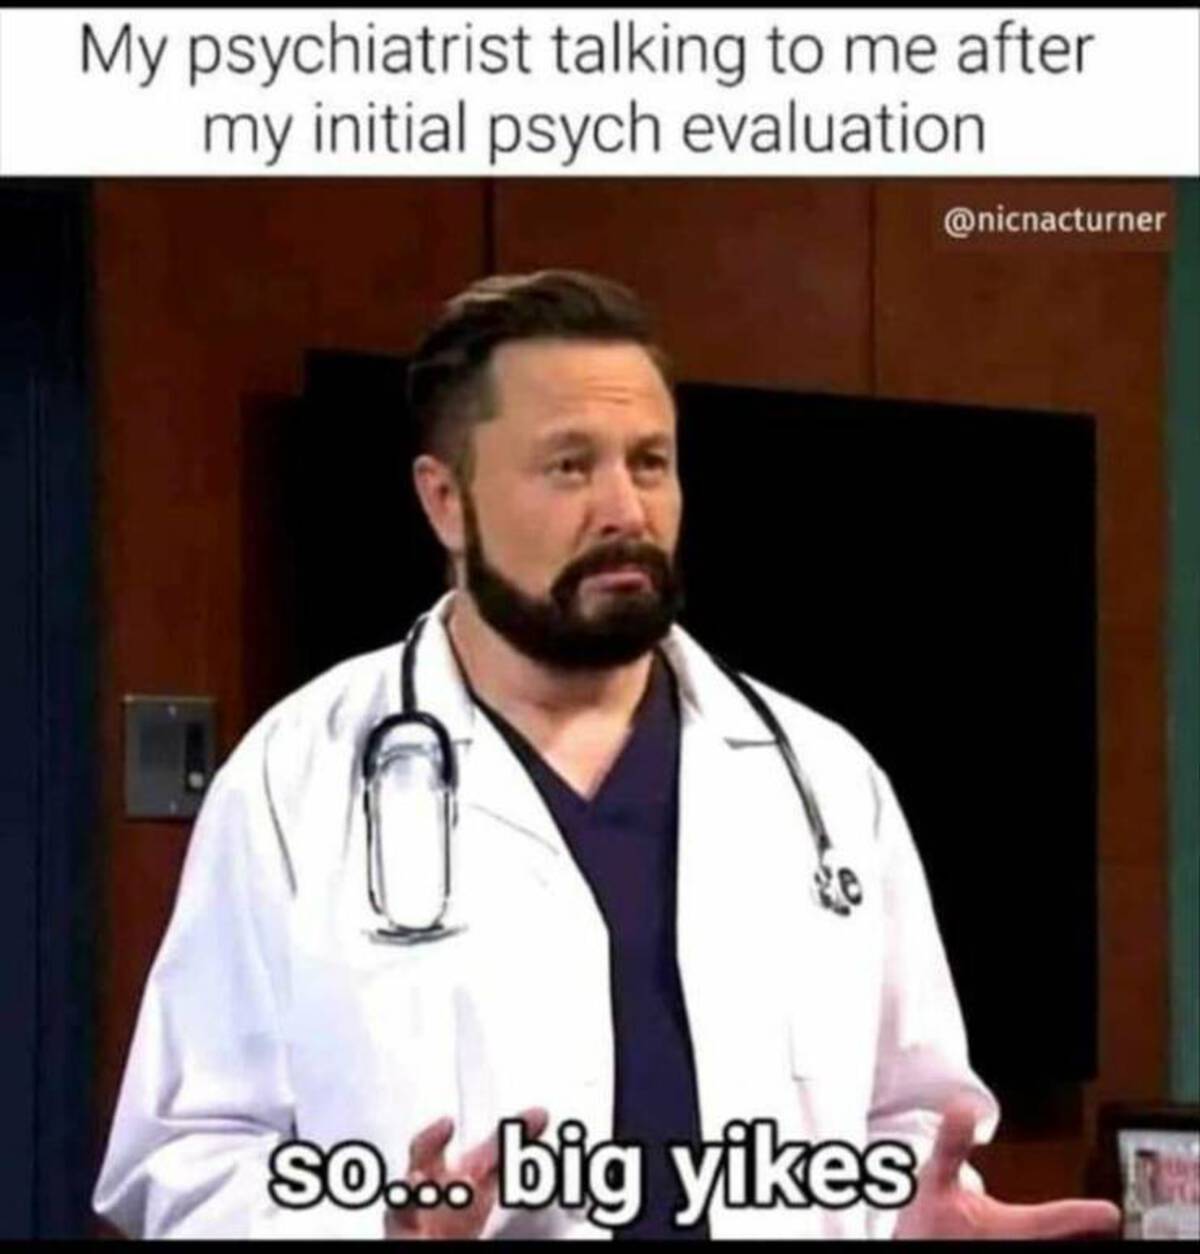 photo caption - My psychiatrist talking to me after my initial psych evaluation so... big yikes